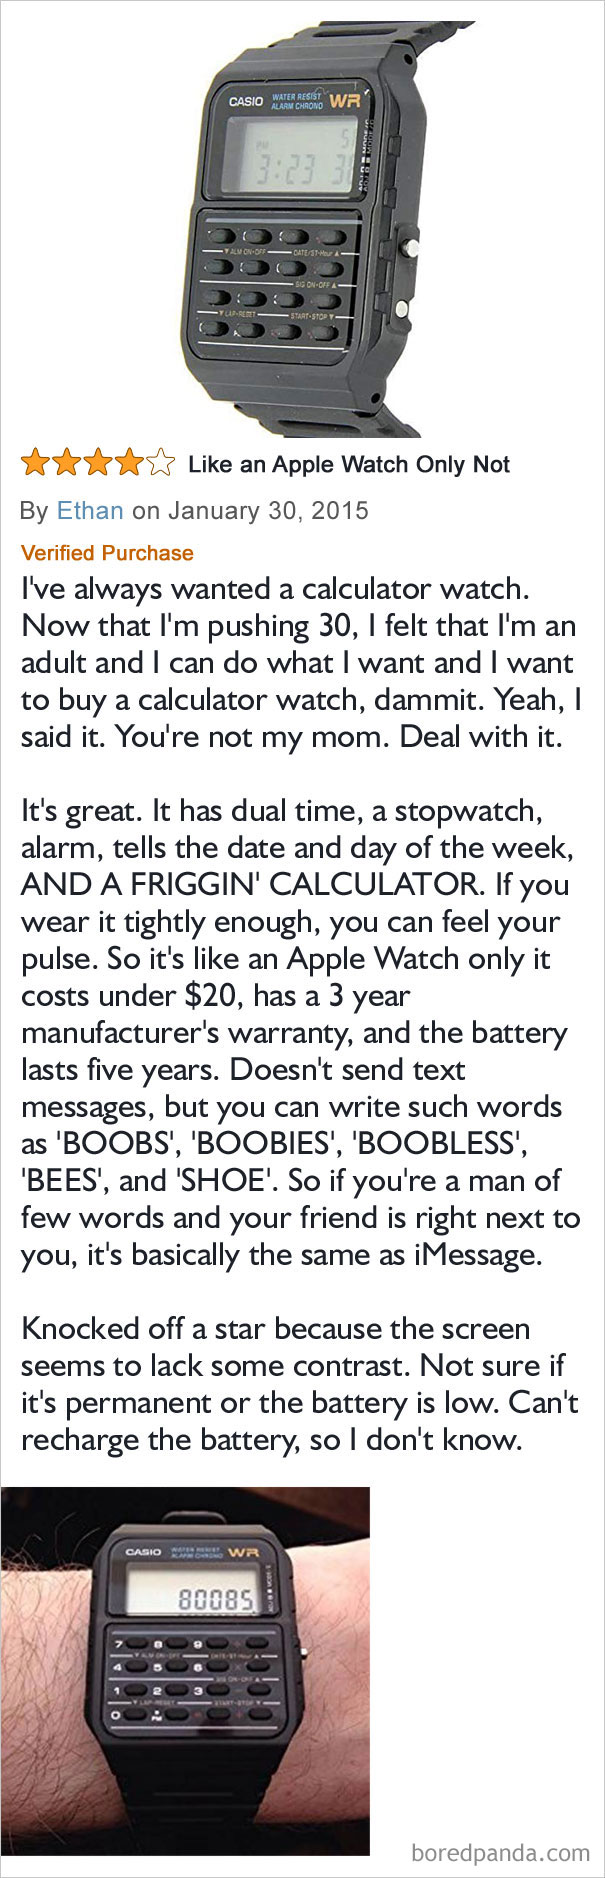 Argumentatively Better Than An Apple Watch The Way This Guy Sells It